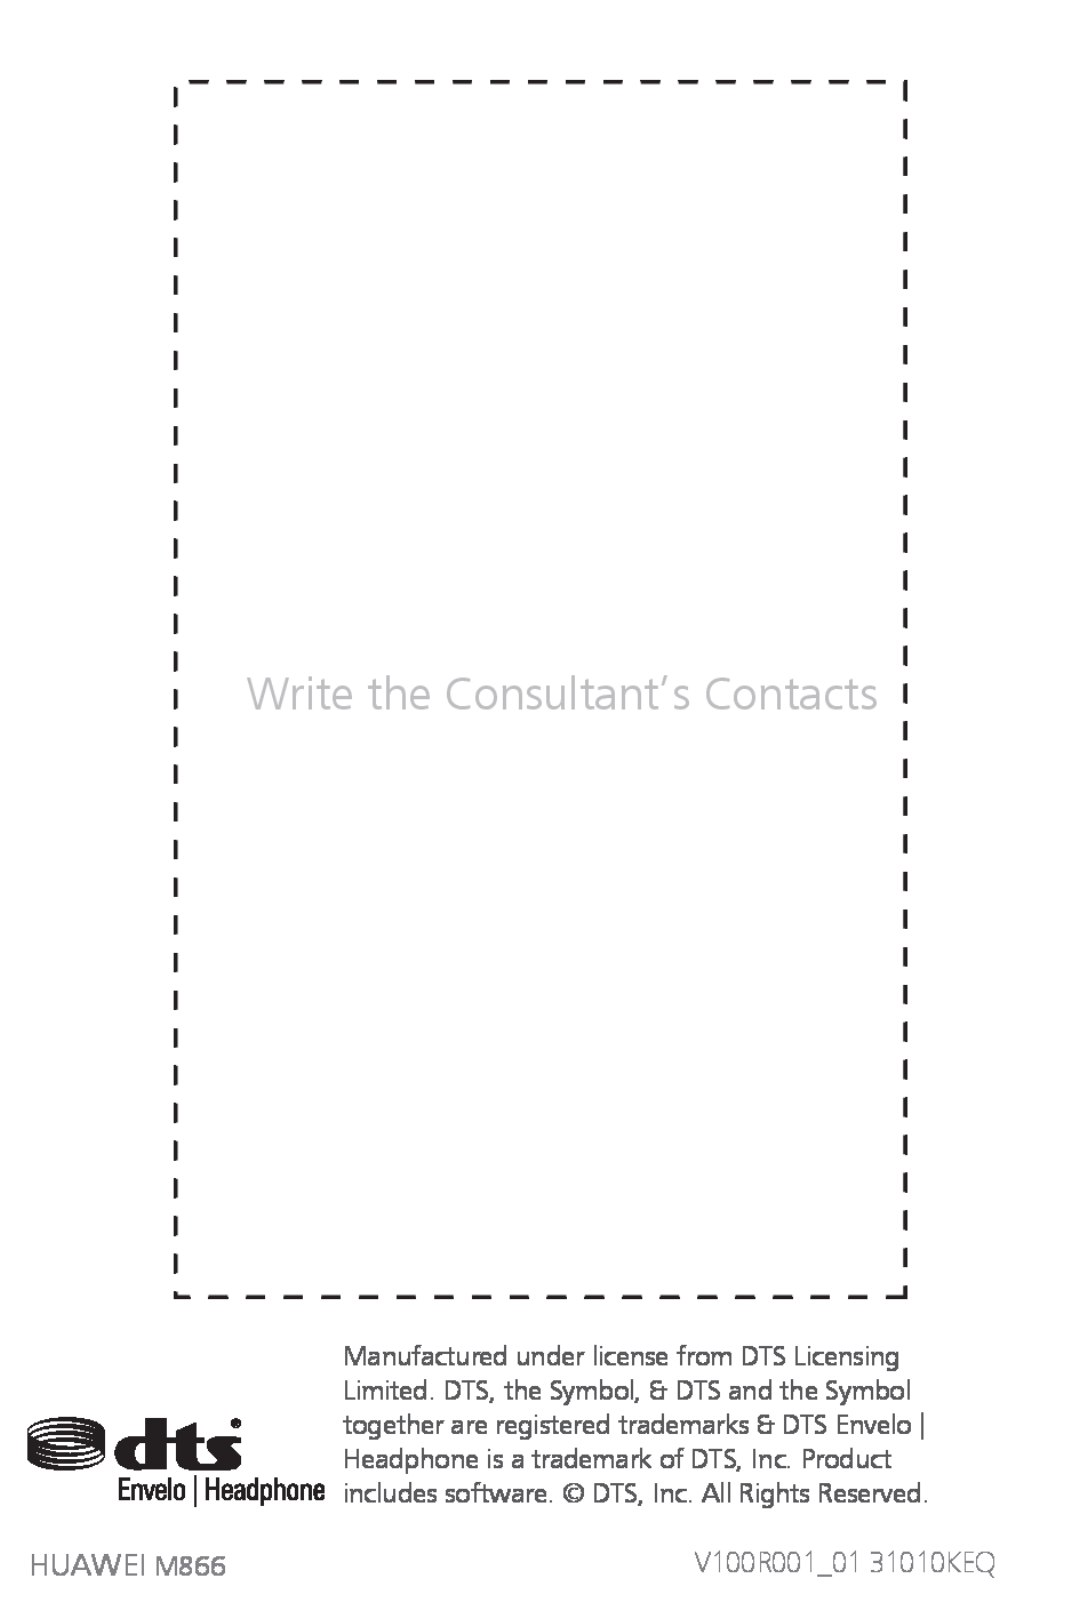 Huawei quick start Write the Consultant’s Contacts, HUAWEI M866, V100R00101 31010KEQ 